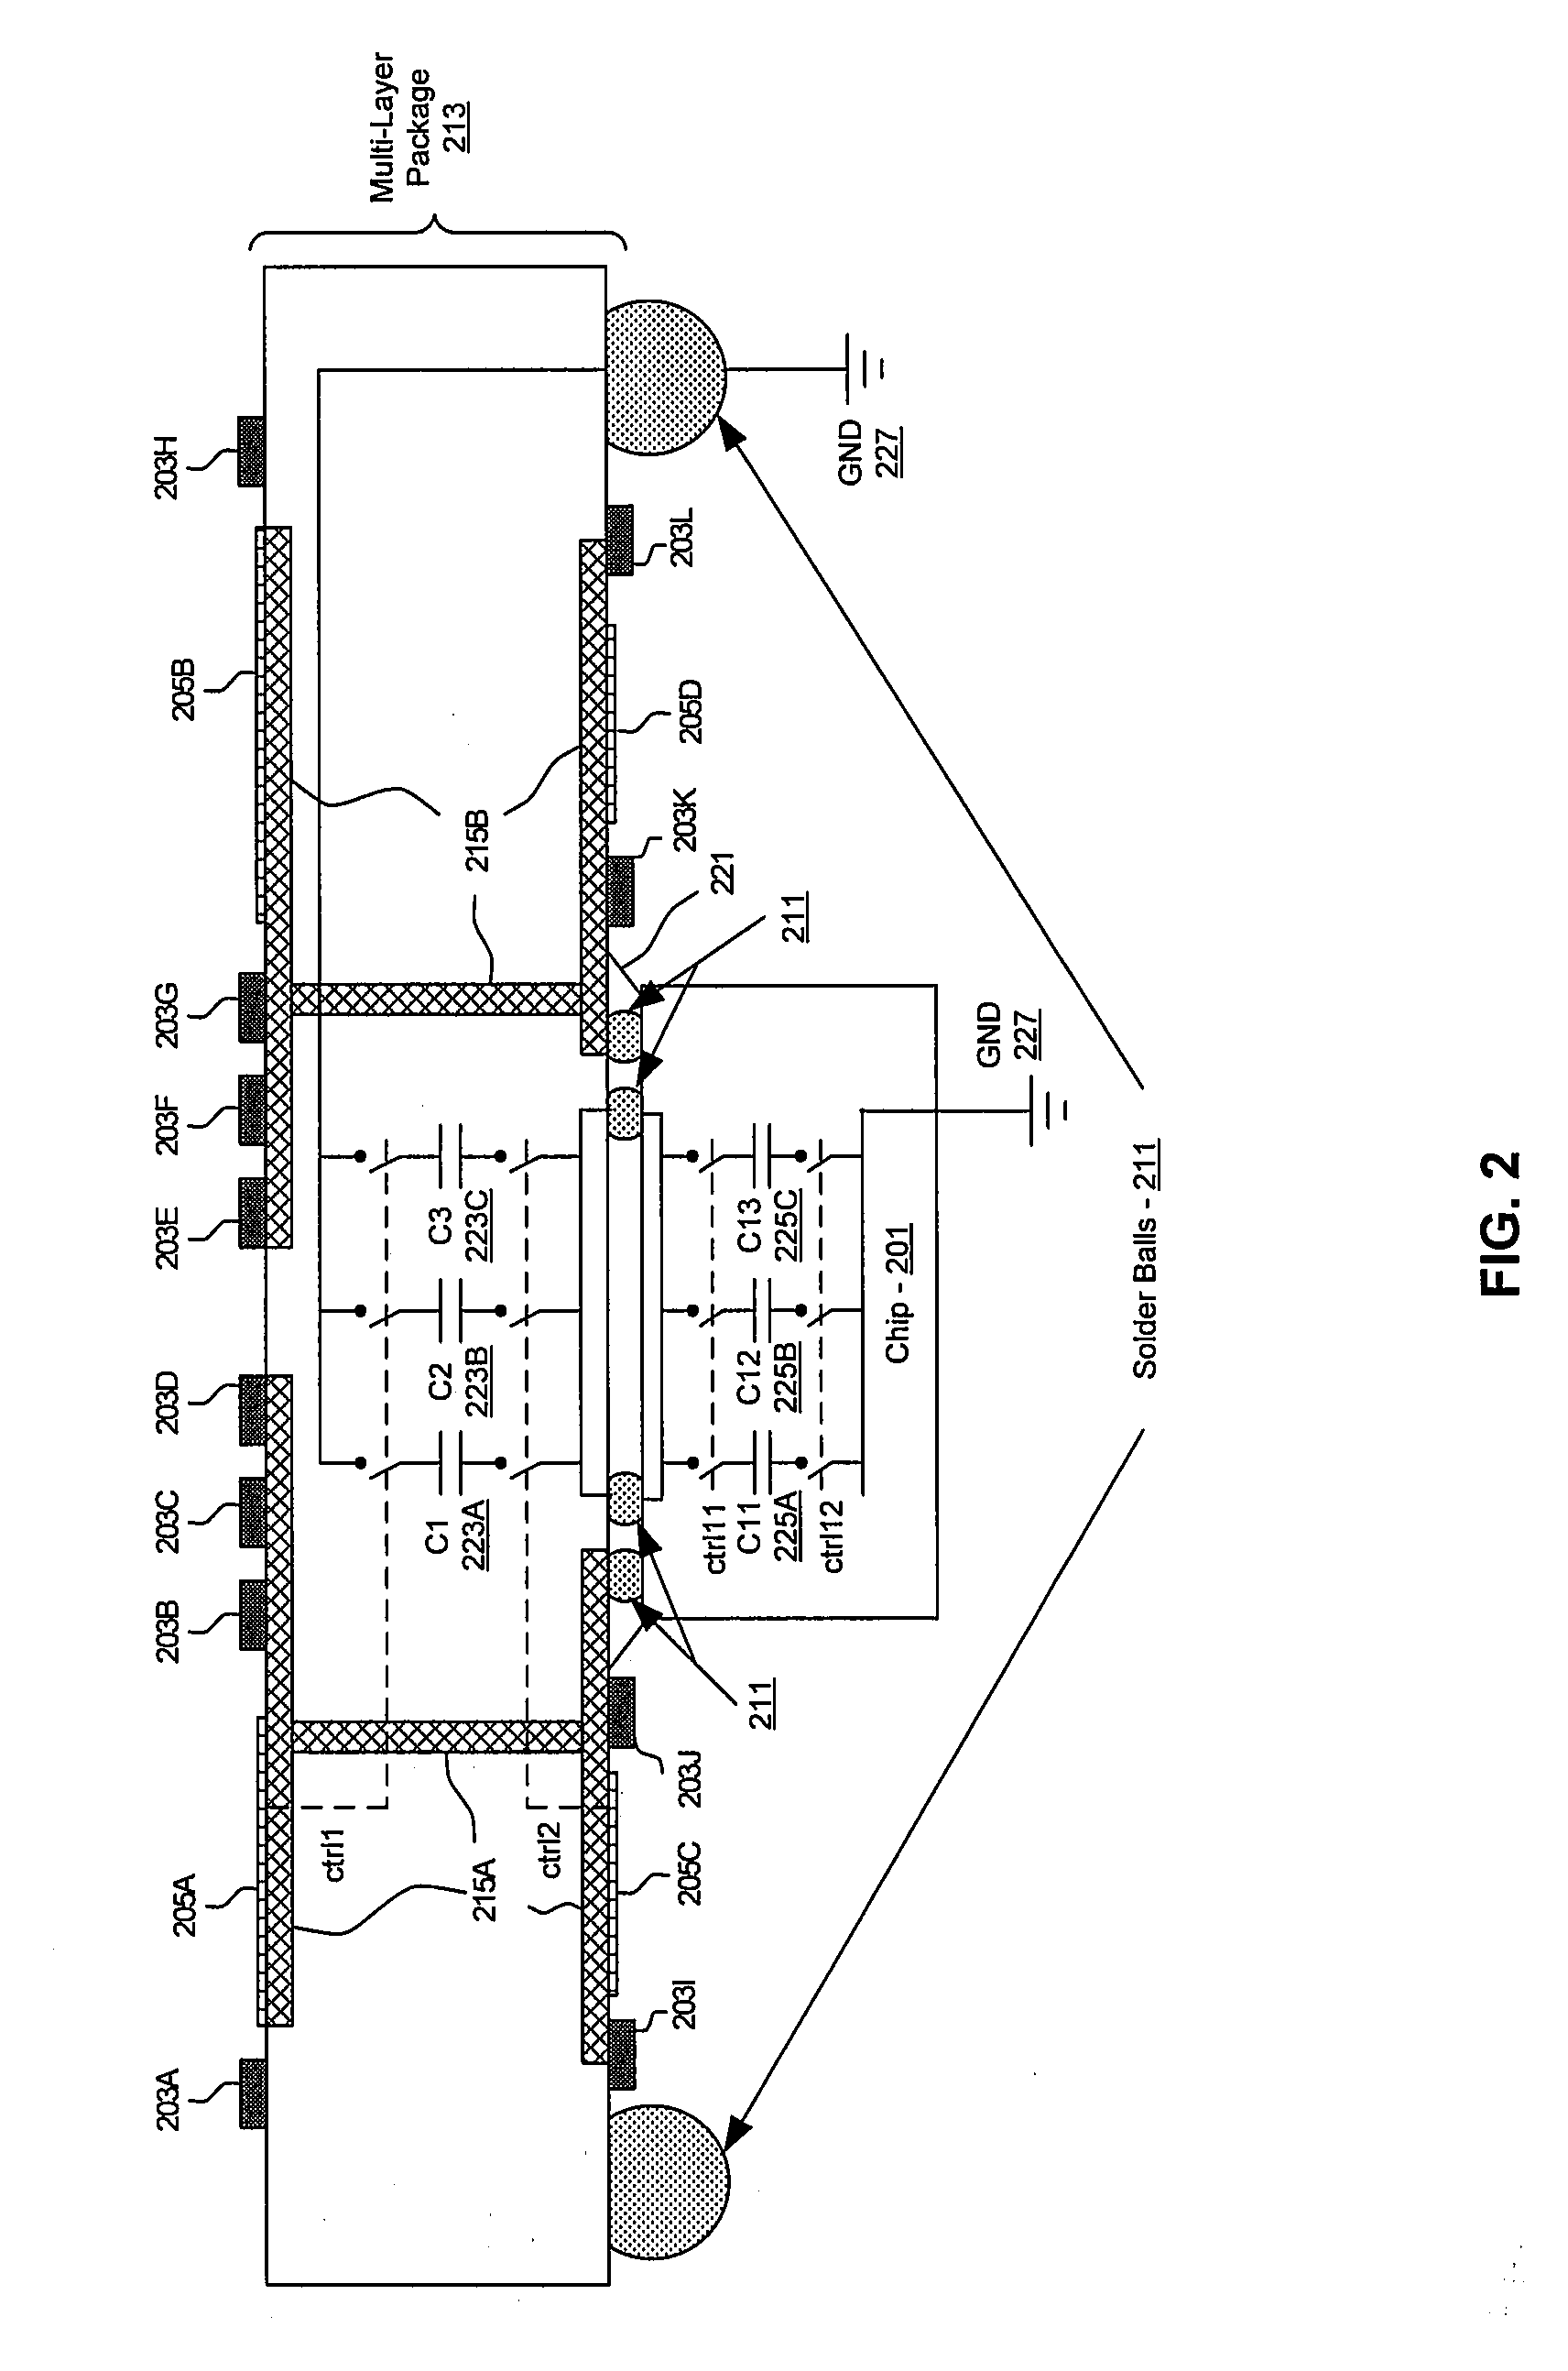 Method and system for increased resolution switching using MEMS and switched capacitors